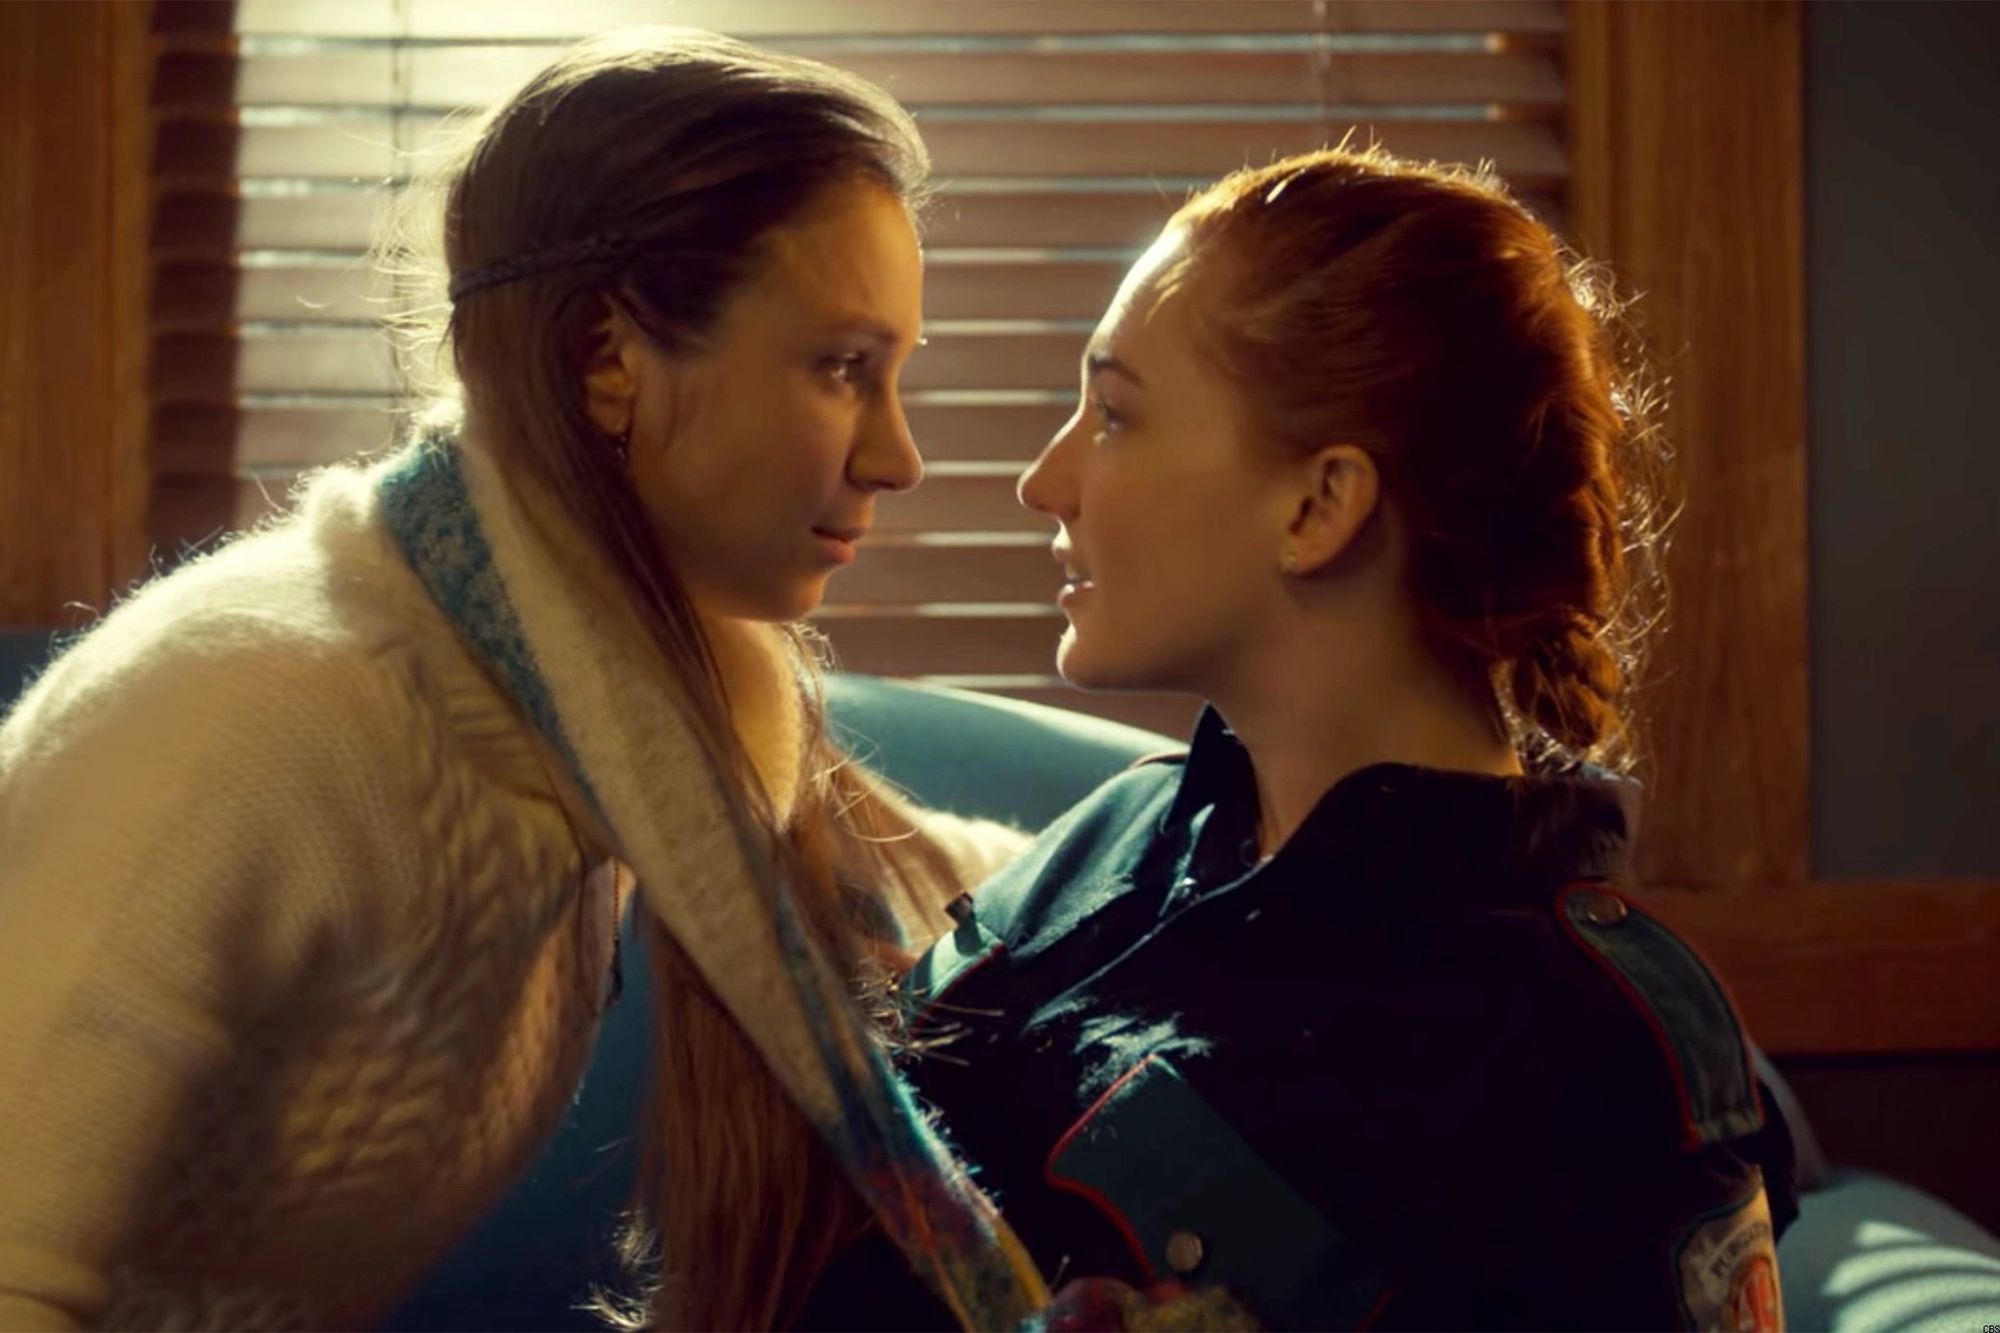 Why I love Wynonna Earp (and why you might, too)